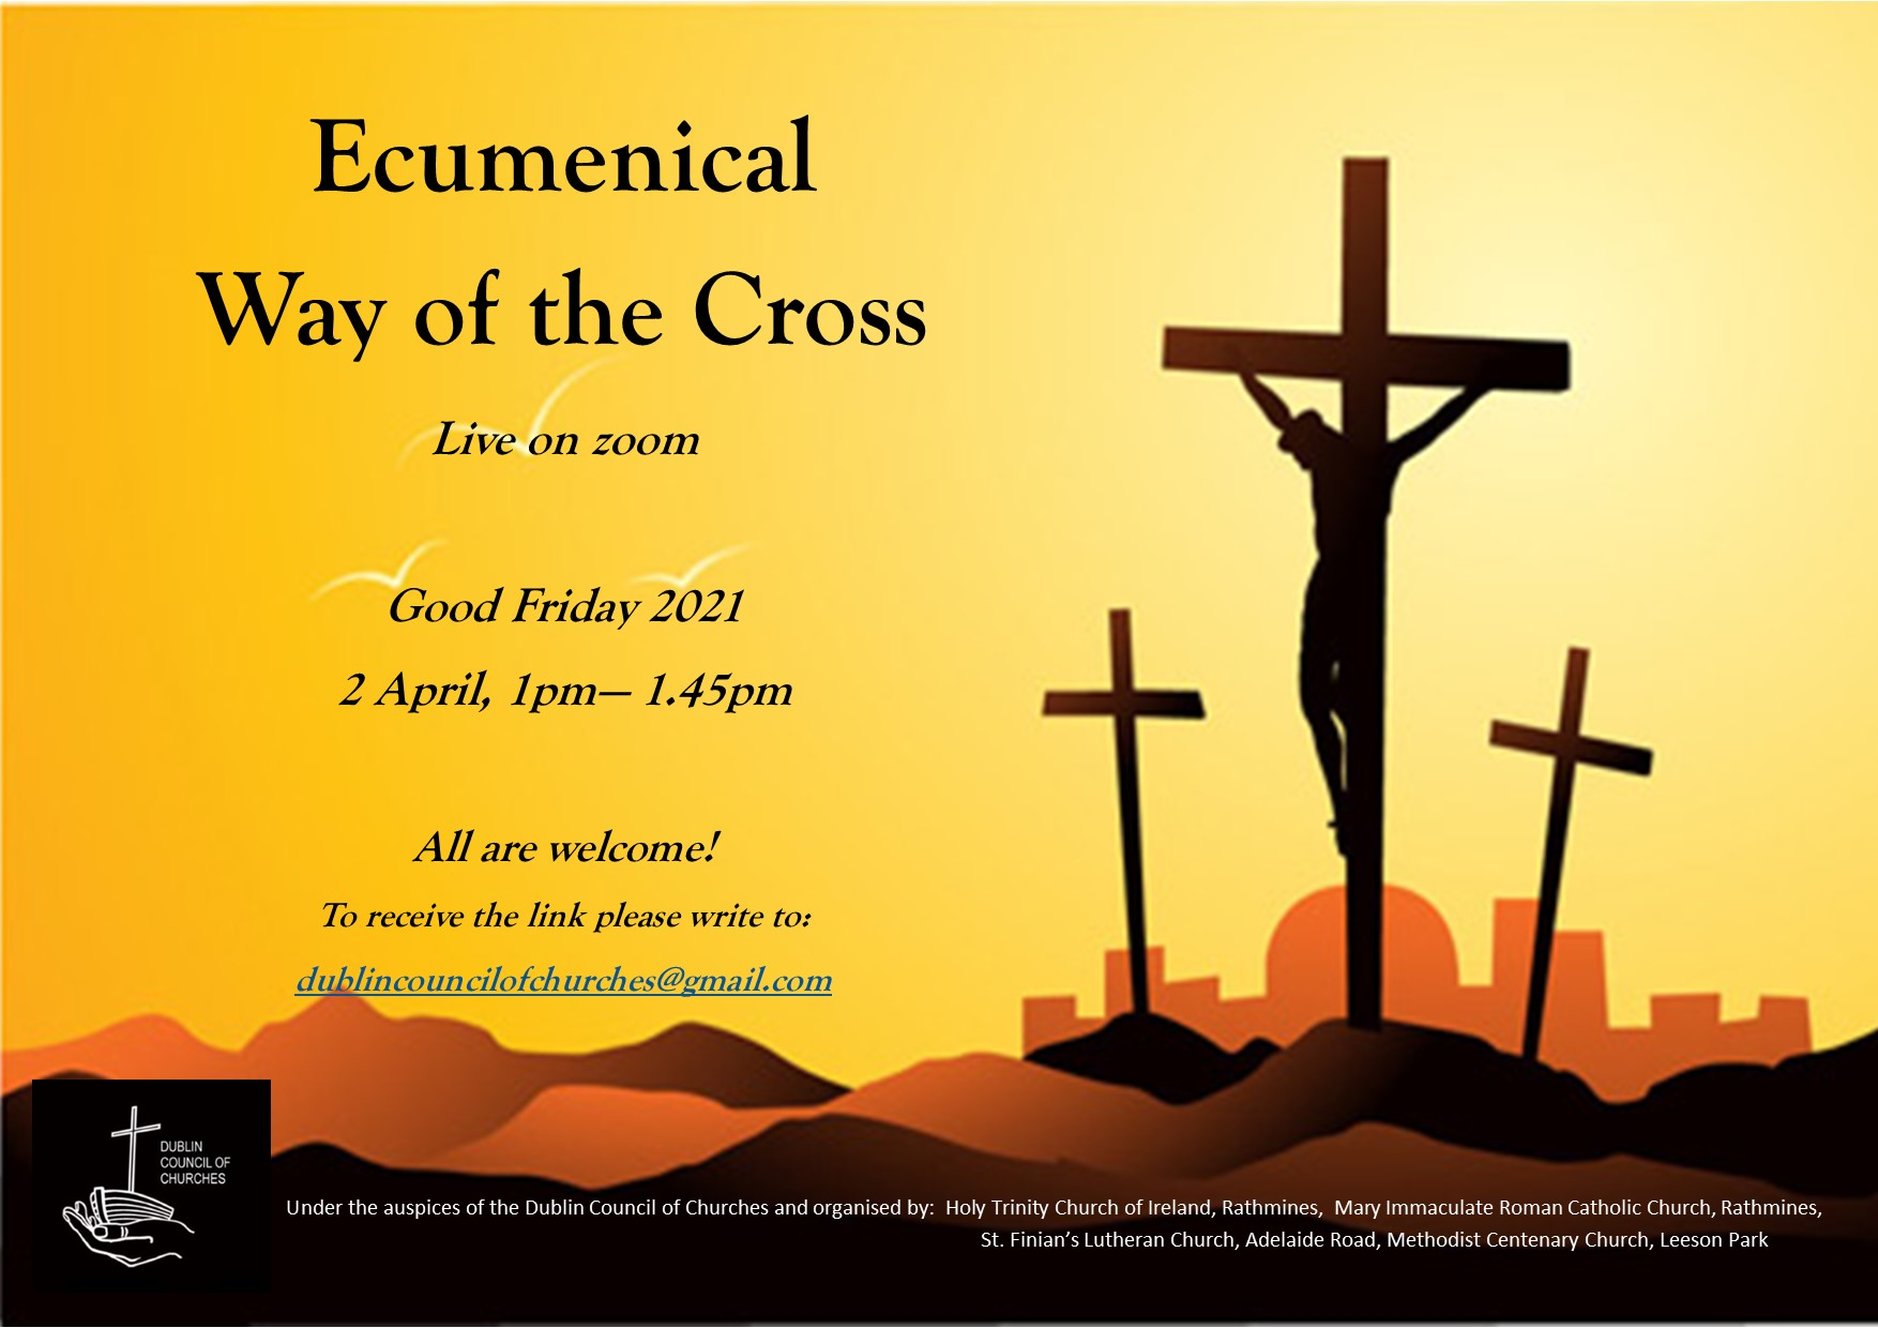 Ecumenical Way of the Cross Live on Zoom The United Dioceses of